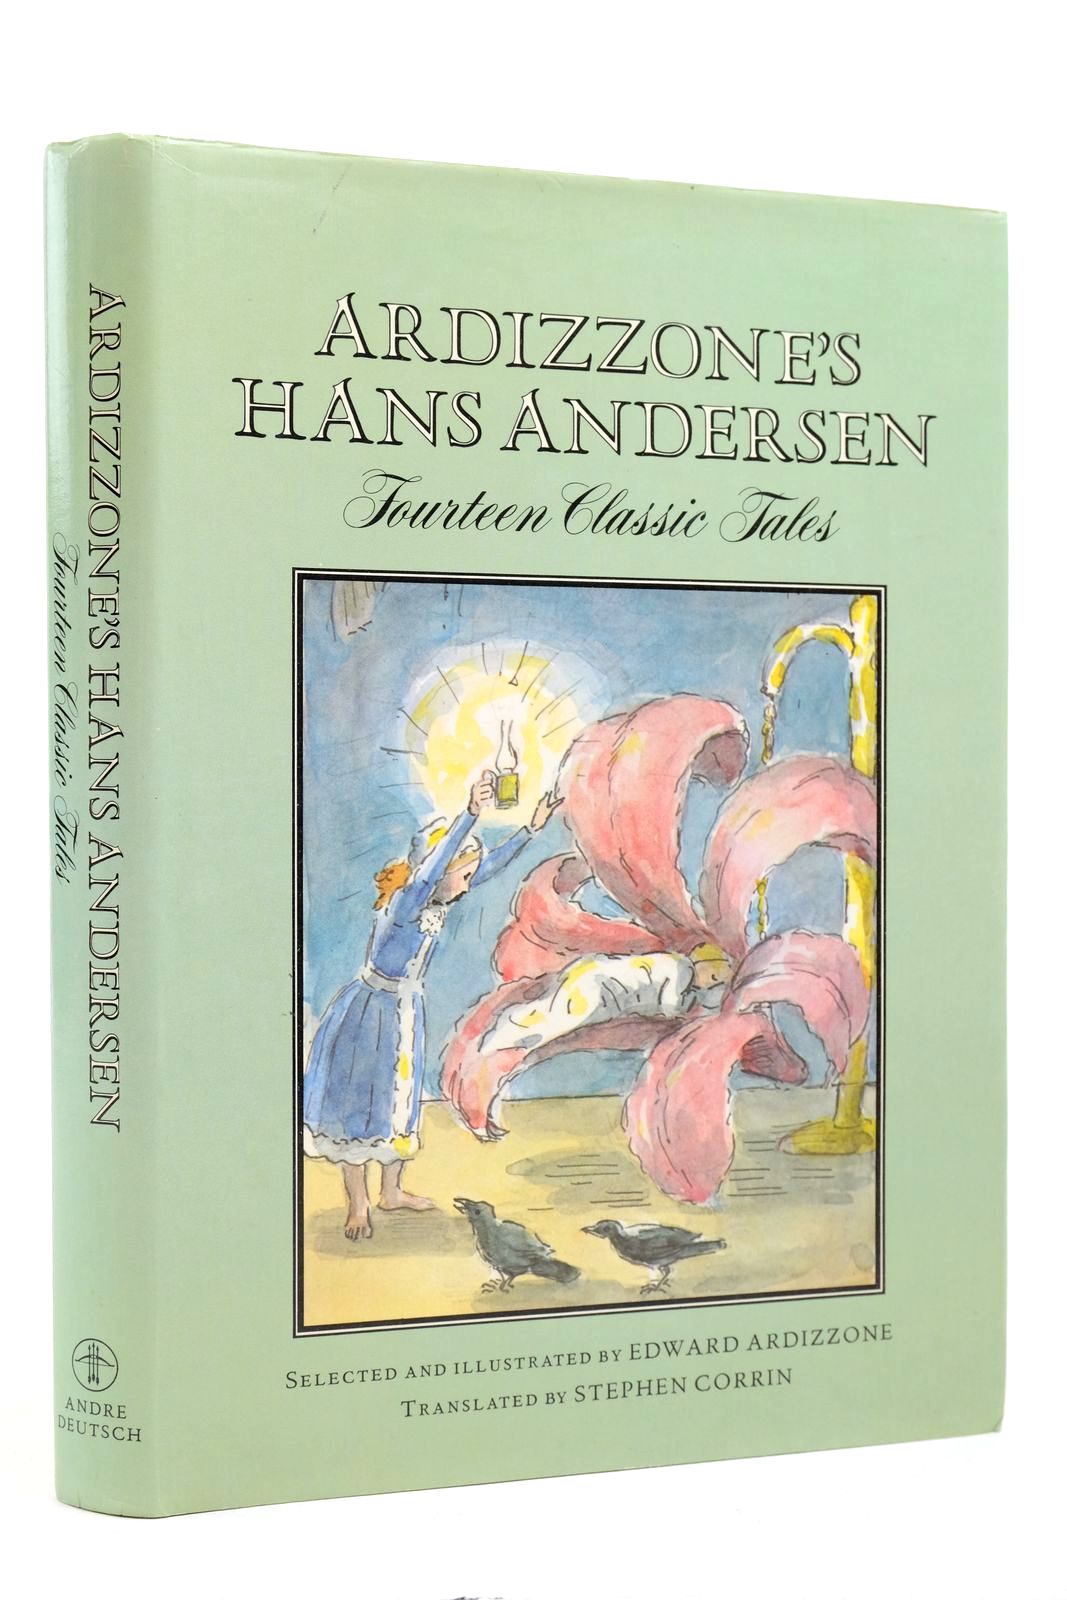 Photo of ARDIZZONE'S HANS ANDERSEN written by Andersen, Hans Christian Corrin, Stephen illustrated by Ardizzone, Edward published by Andre Deutsch (STOCK CODE: 2139422)  for sale by Stella & Rose's Books